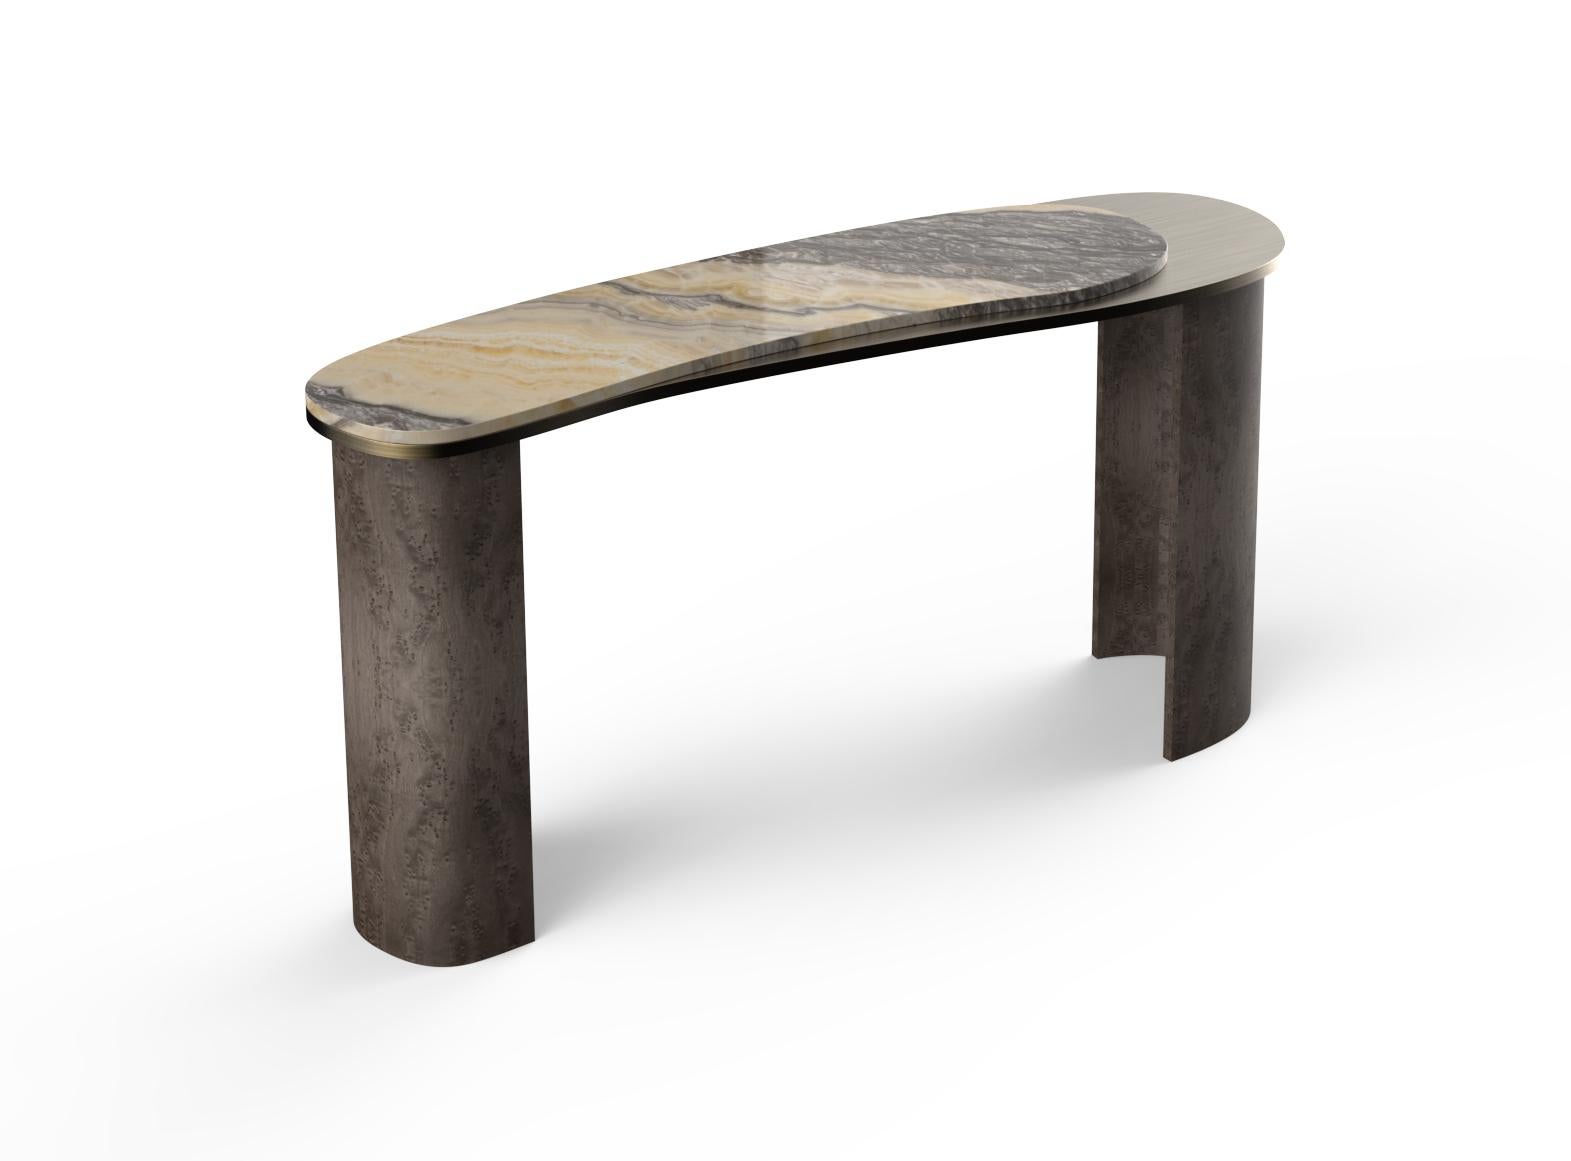 Armona Console table, Contemporary Collection, Handcrafted in Portugal - Europe by Greenapple.

Designed by Rute Martins for the Contemporary Collection, the Armona modern console table pays homage to the natural beauty and organic lines of Armona